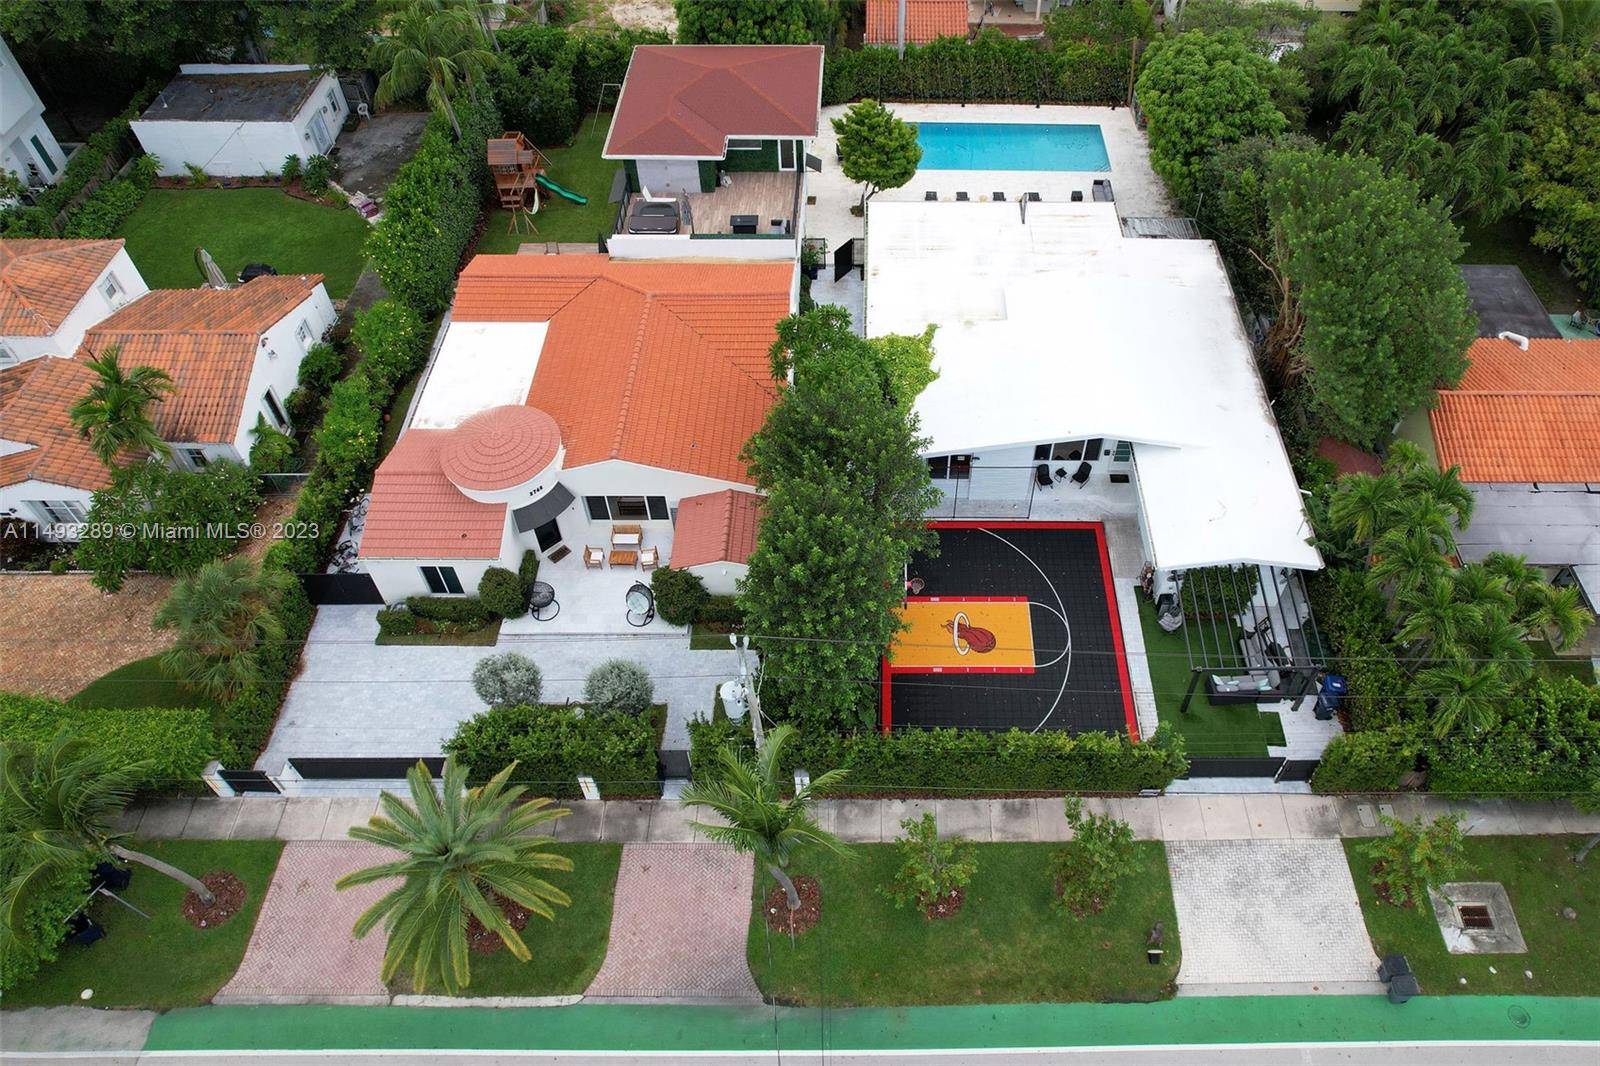 Feast your eyes on this double lot featuring two homes in the heart of Miami Beach.